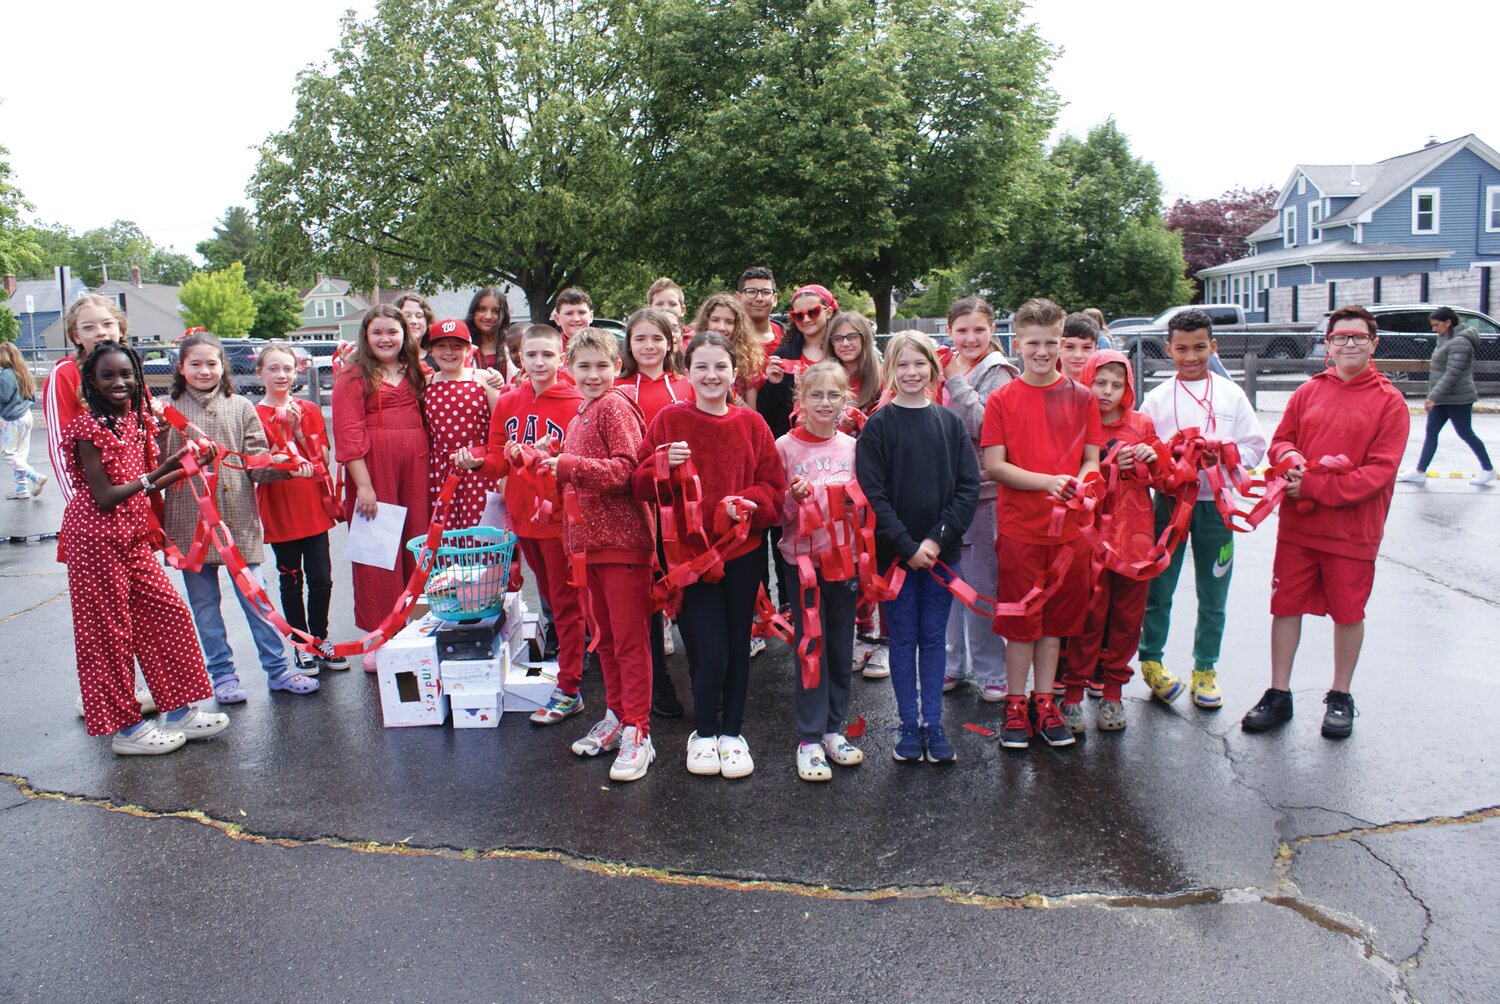 JOB WELL DONE: The Fifth grade class of Oak Lawn elementary dresses in red to match their section of the “kindness chain” they organized and built in the hopes of bringing the whole school together in the name of kindness. (Photo by Steve Popiel)